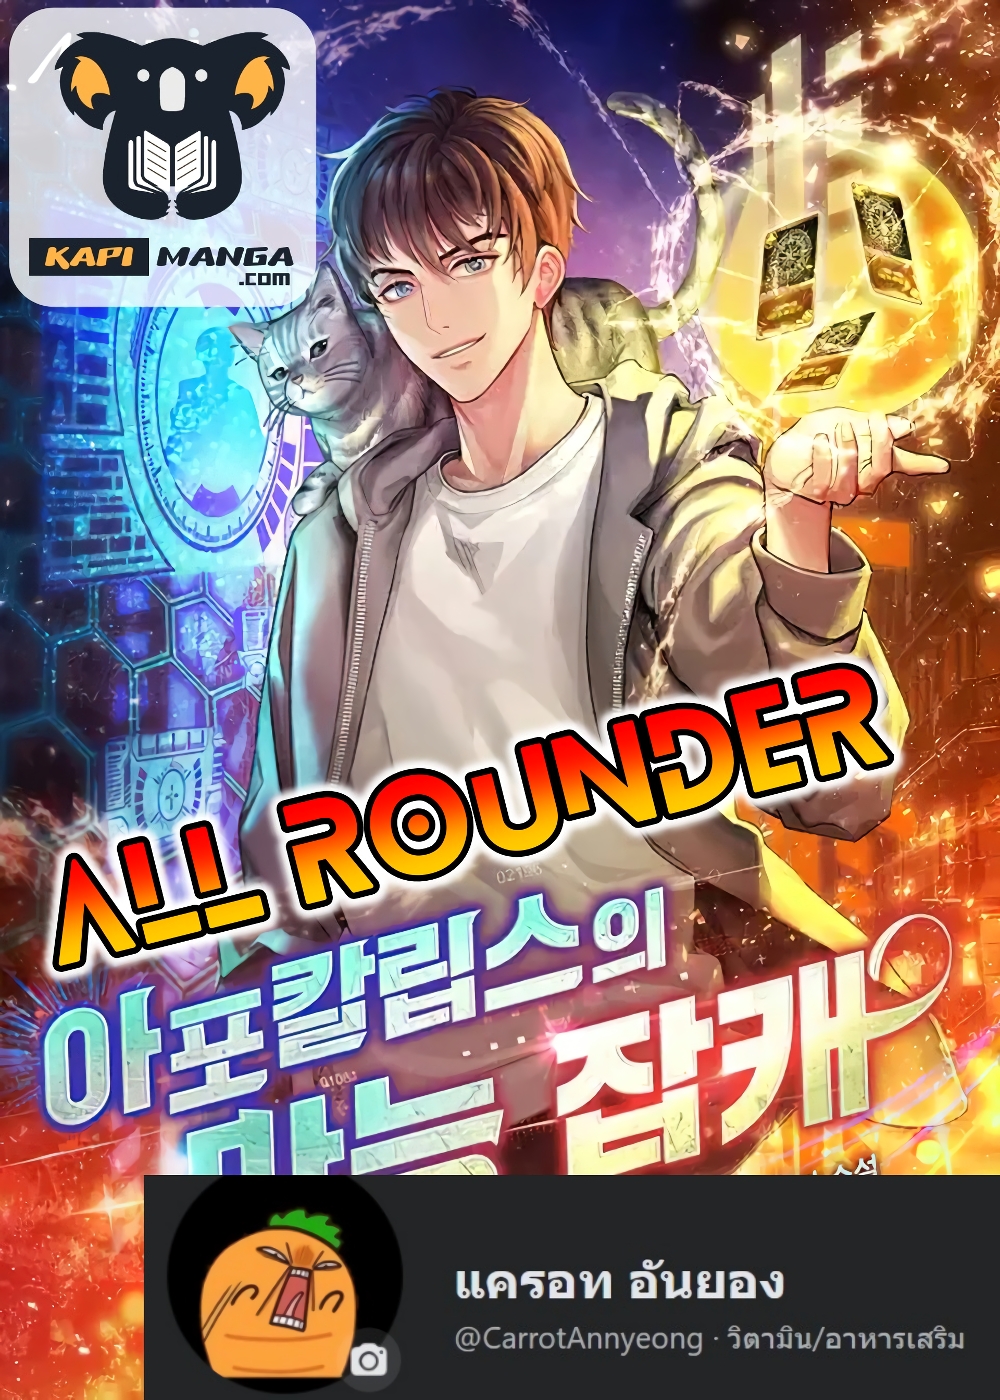 All Rounder2 (1)